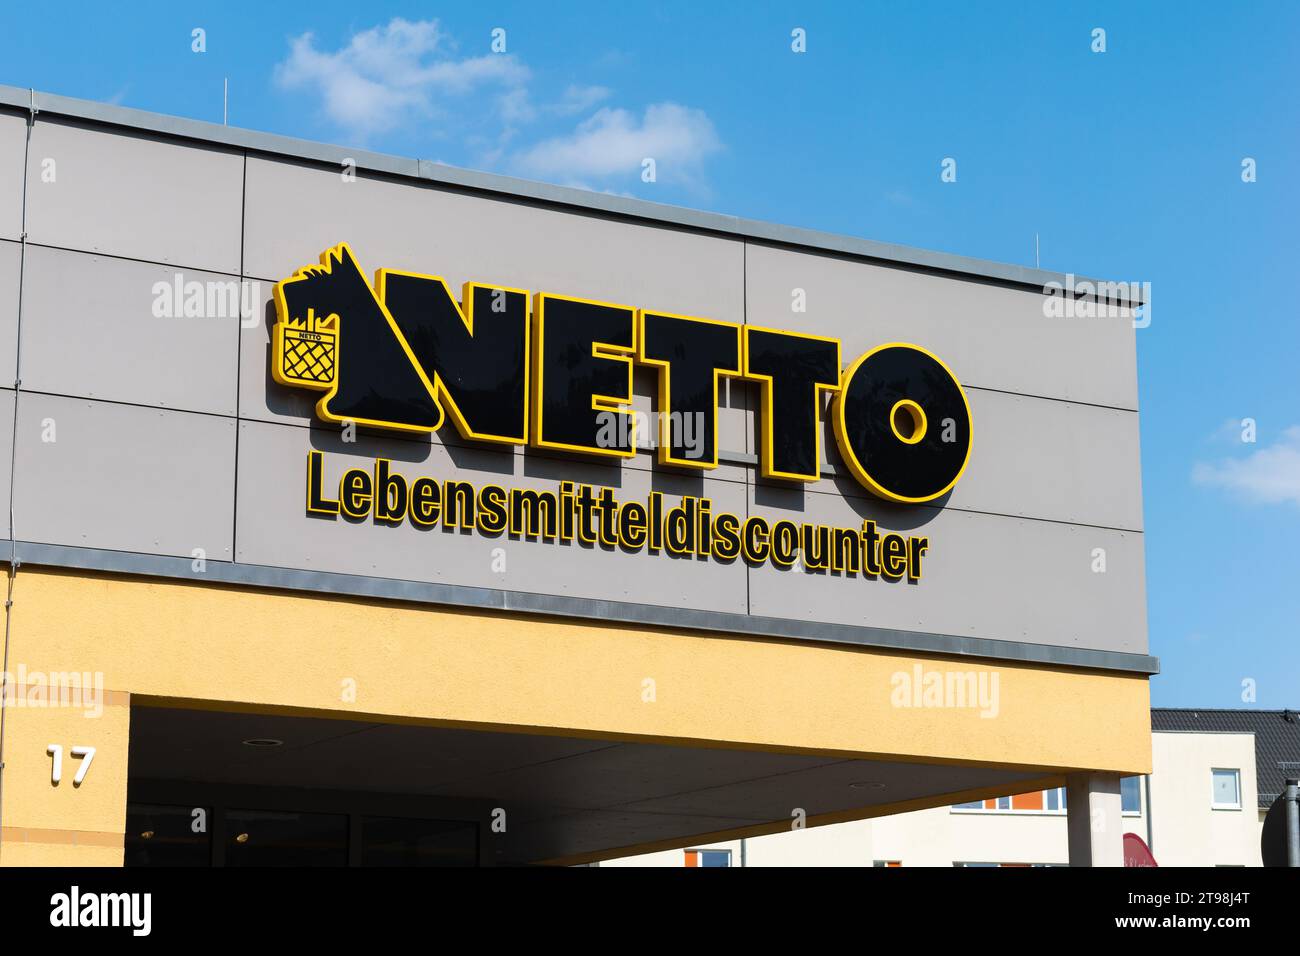 Netto Lebensmitteldiscounter (food discounter) sign on a building. The black and yellow logo with the dog is on the wall. Grocery store advertisement. Stock Photo